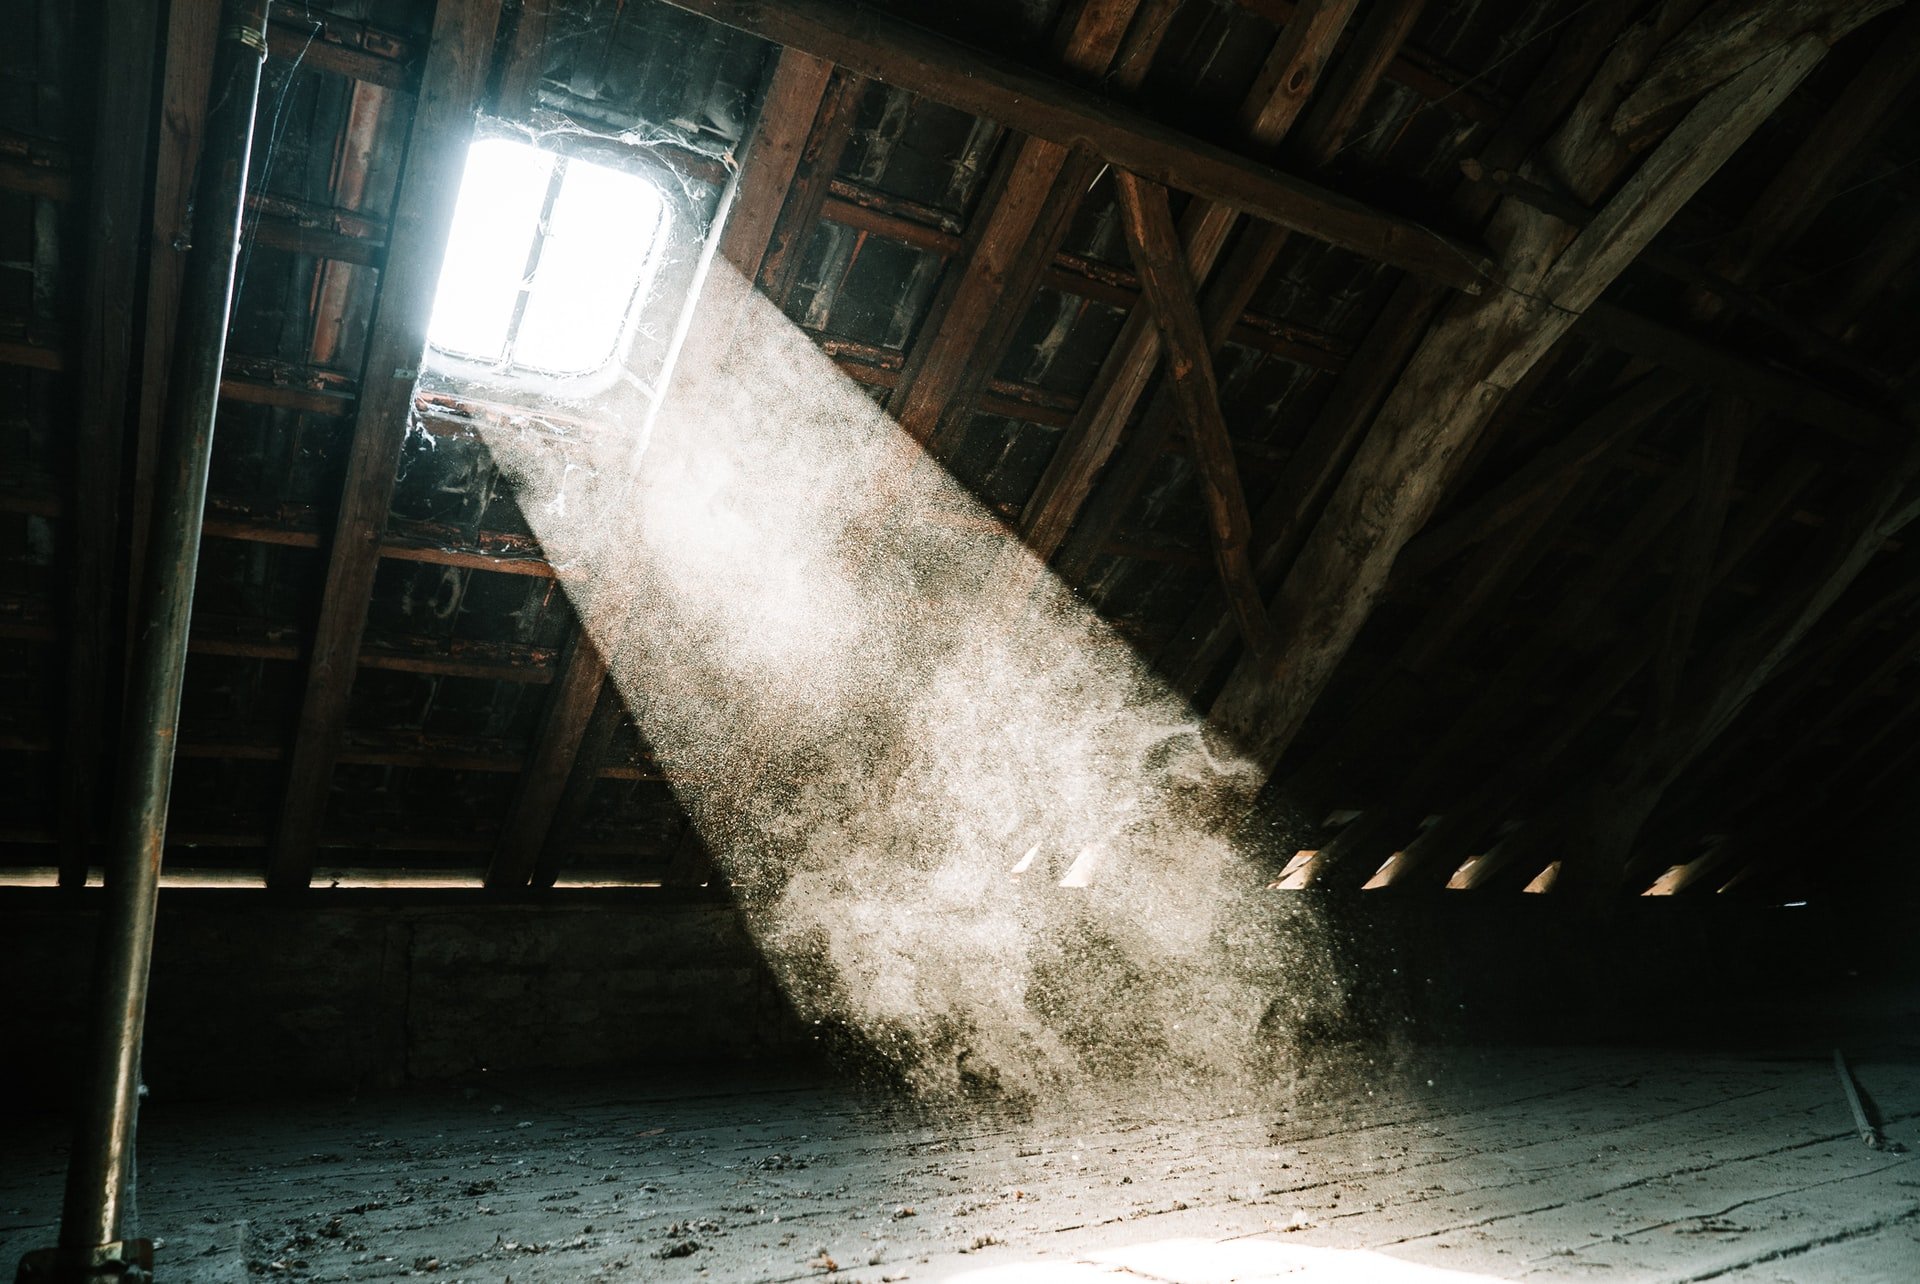 She went up to the attic after hearing sounds coming from there. | Source: Unsplash